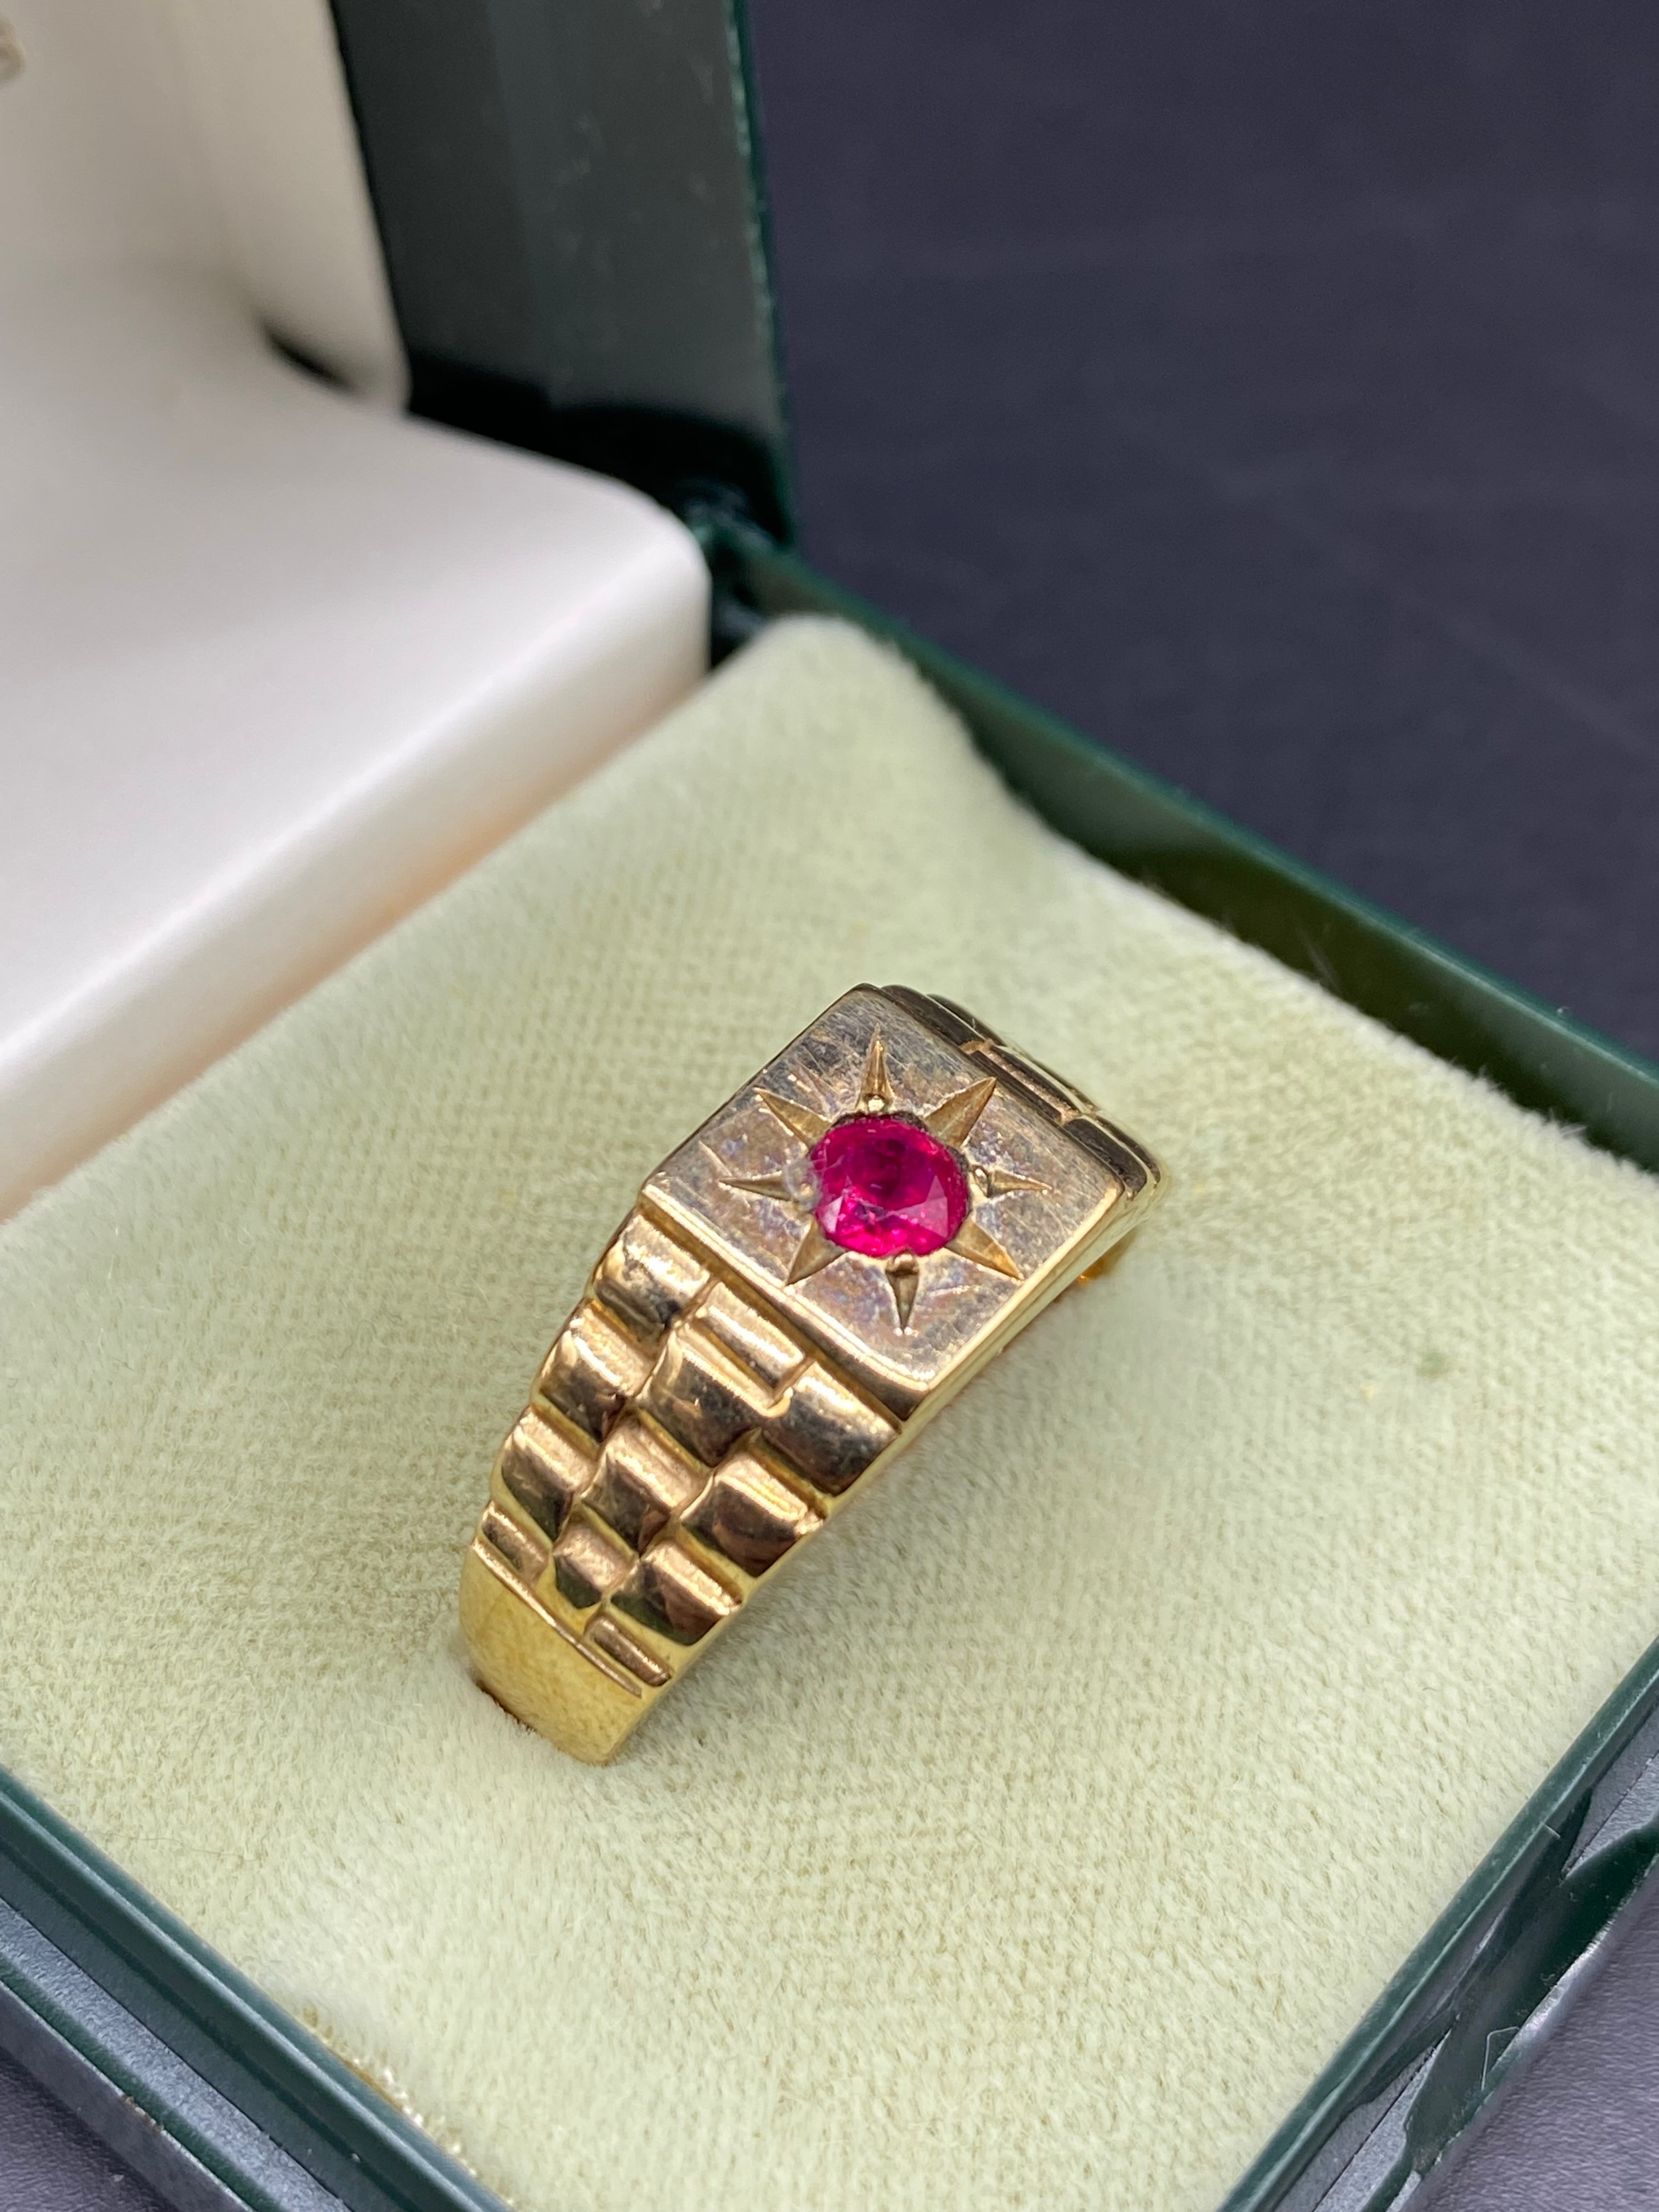 9ct gold Gents ring set with garnet stone [size T 1/2] [5.78] grams - Image 2 of 3